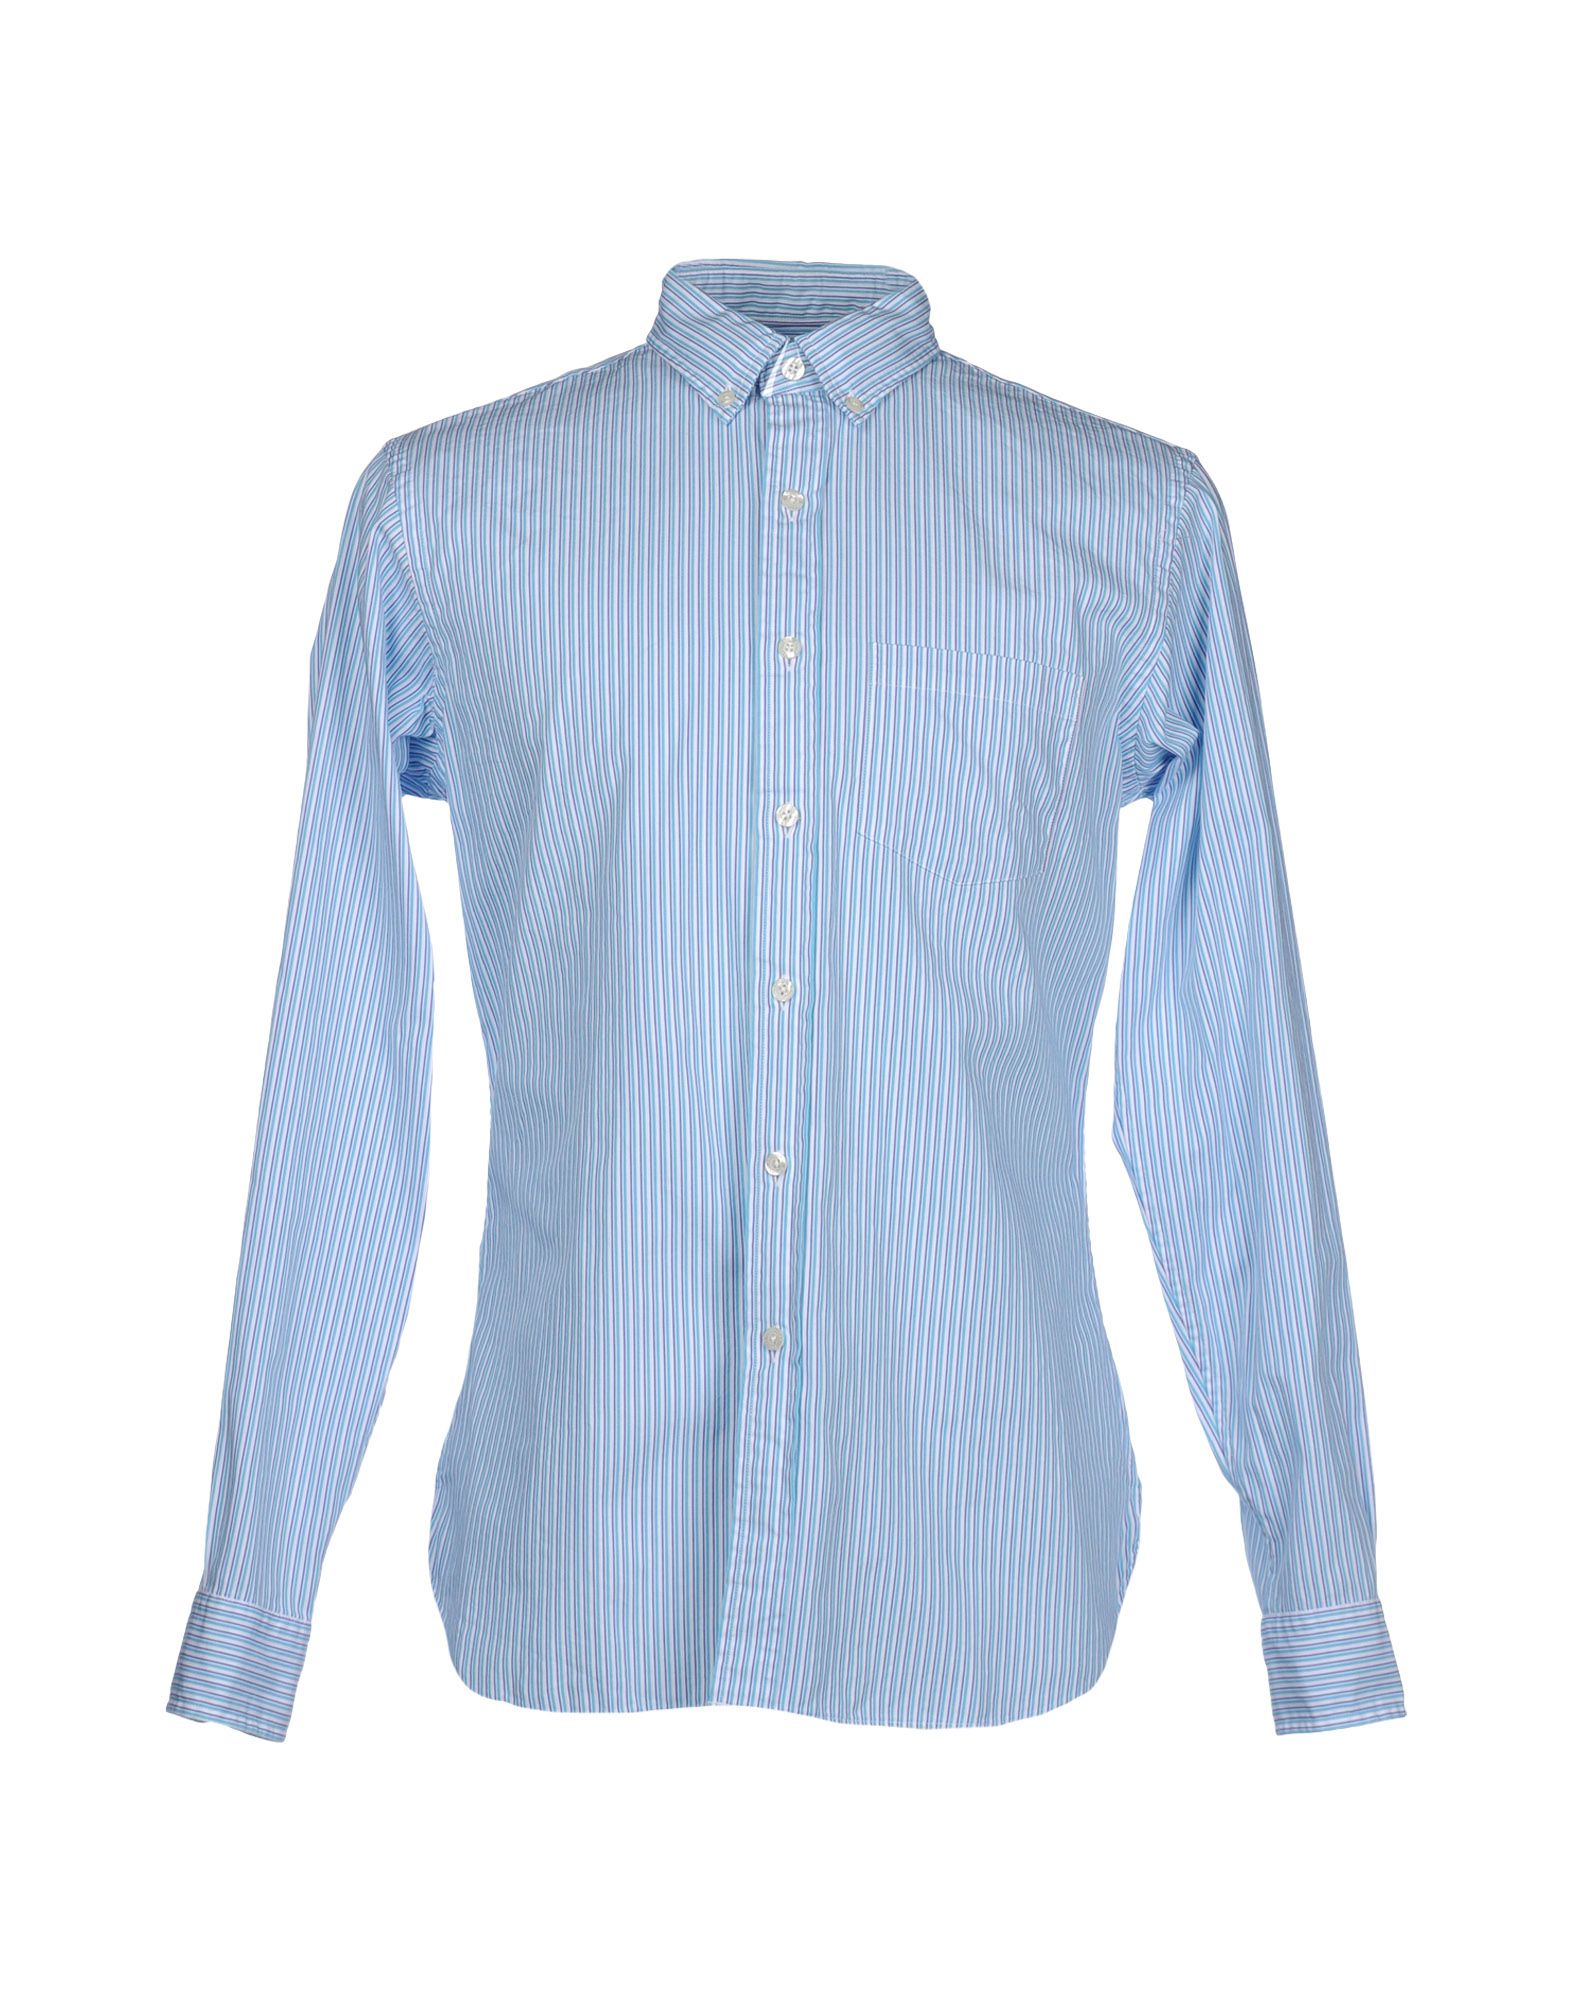 Lyst - Brooks Brothers Long Sleeve Shirt in Blue for Men